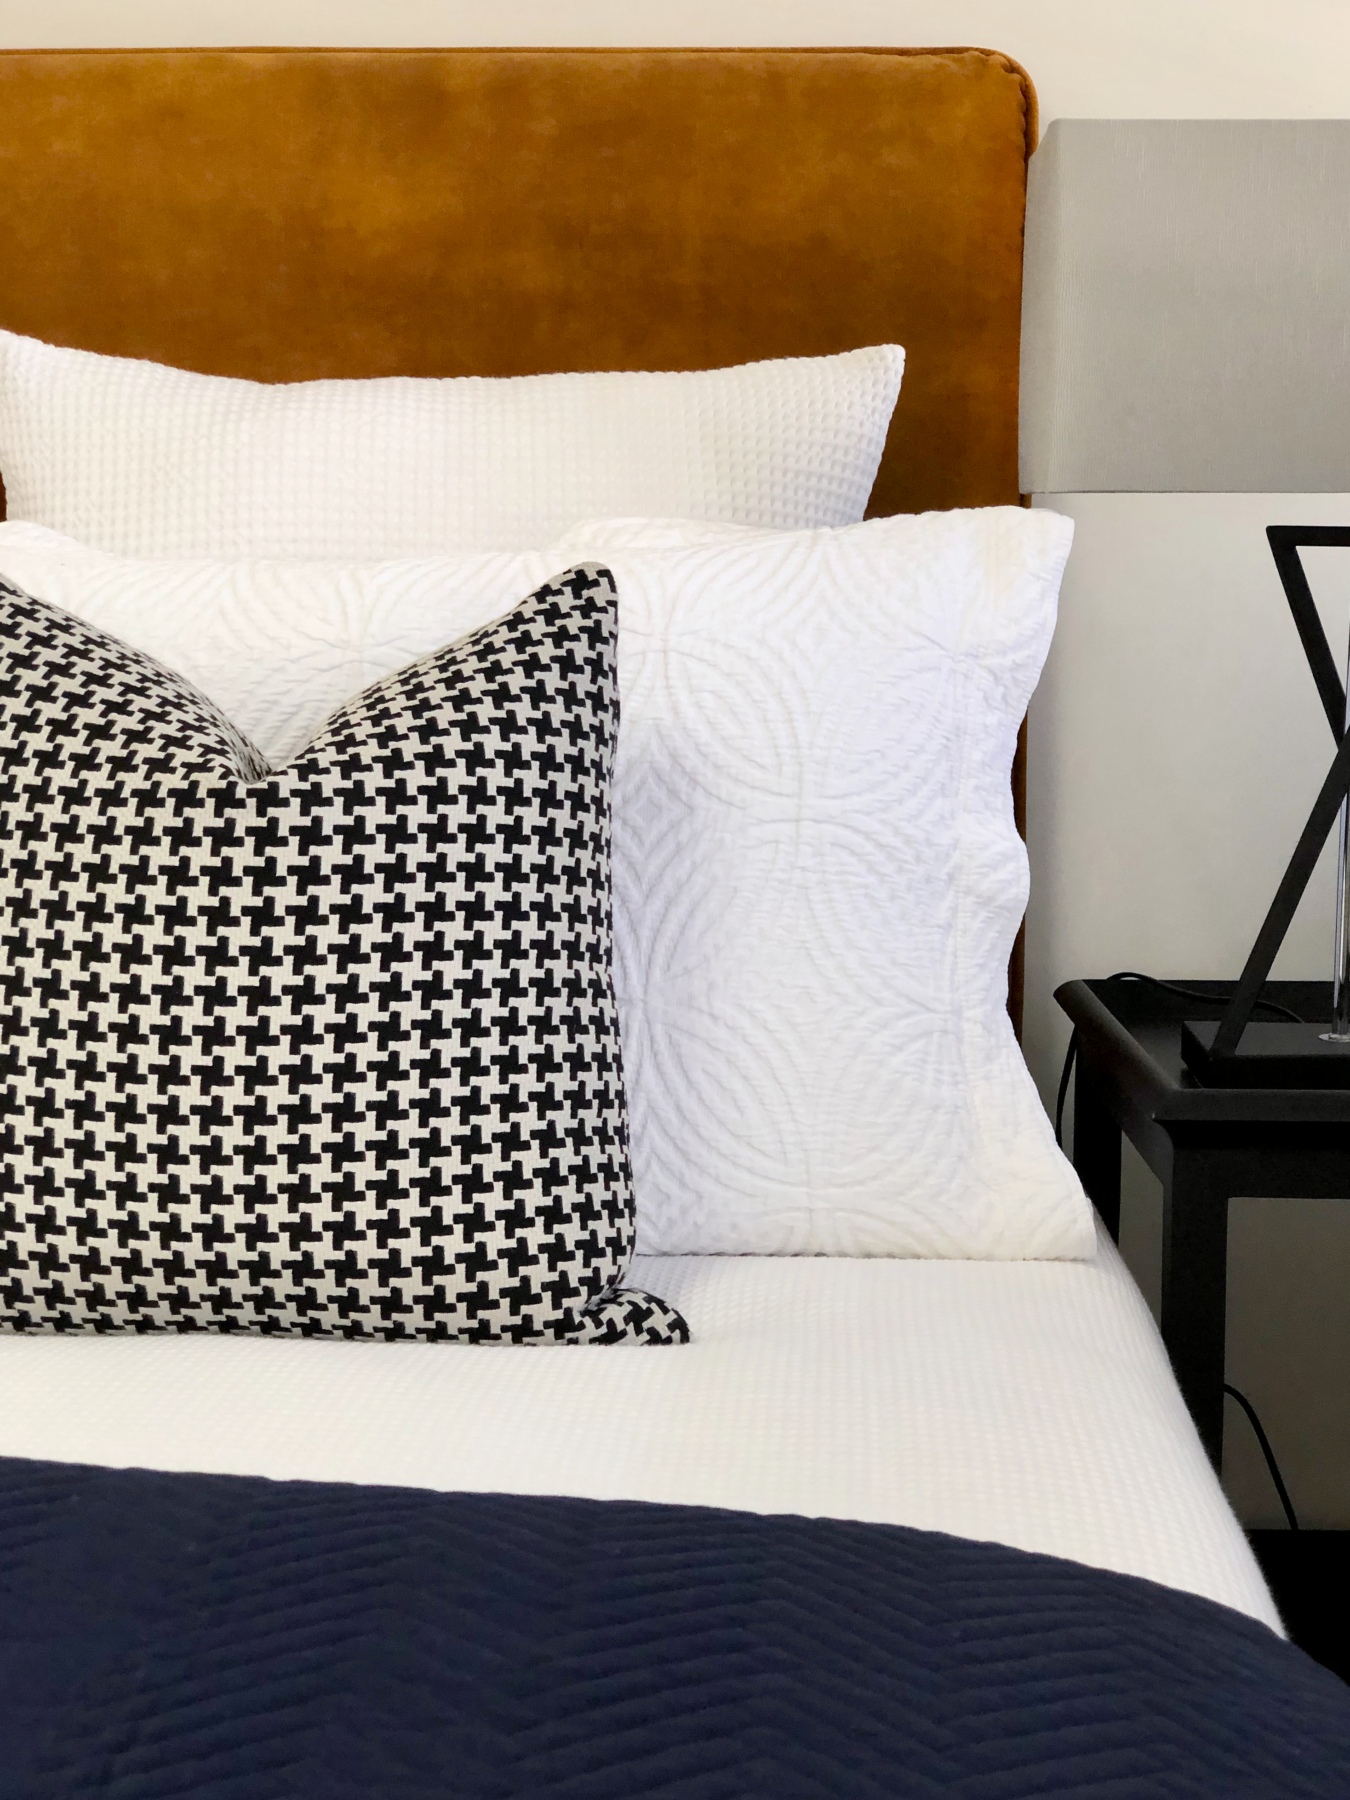 Contemporary bedroom with custom made monochrome houndstooth cushions, textured white linen, dark blue comforter and rust velvet headboard